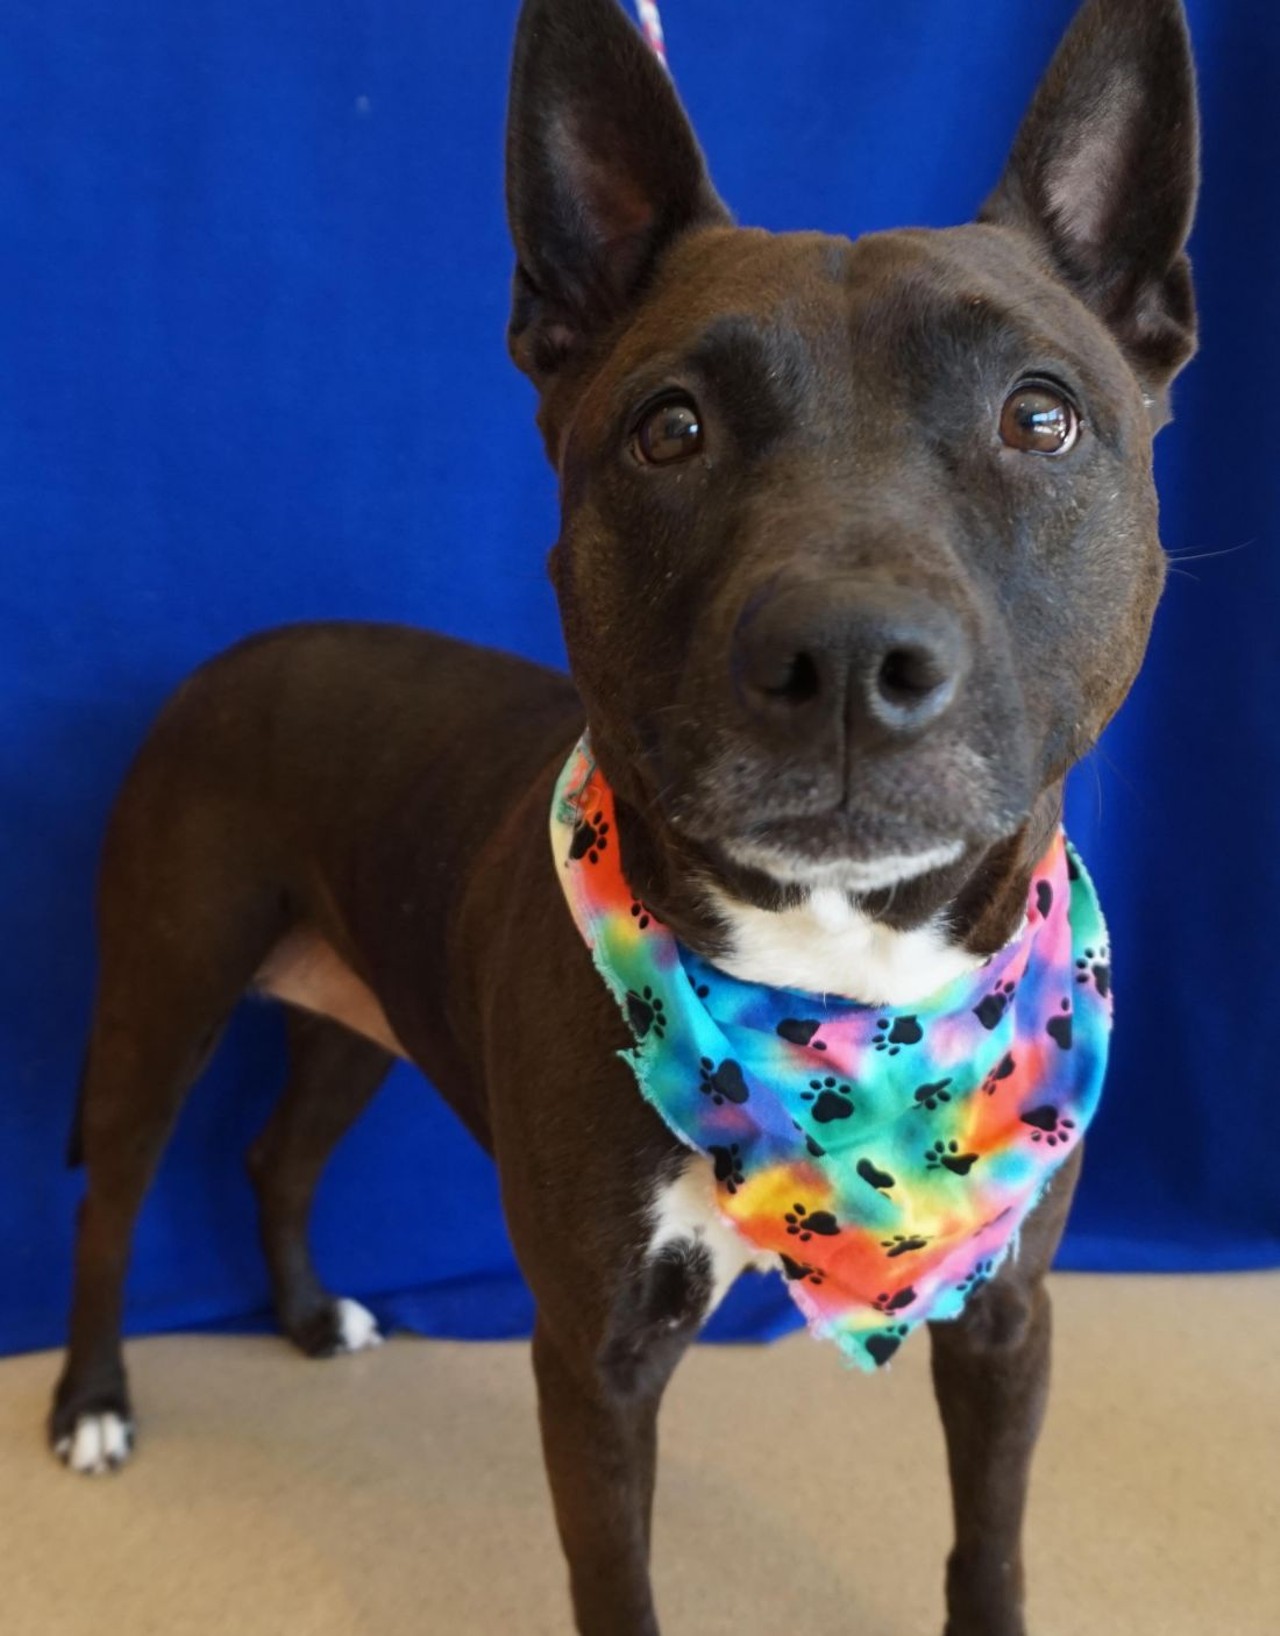 NAME: Lula
GENDER: Female
BREED: Shepherd-Terrier mix
AGE: 4 years
WEIGHT: 54 pounds
SPECIAL CONSIDERATIONS: None
REASON I CAME TO MHS: Agency transfer
LOCATION: Rochester Hills Center for Animal Care
ID NUMBER: 867924